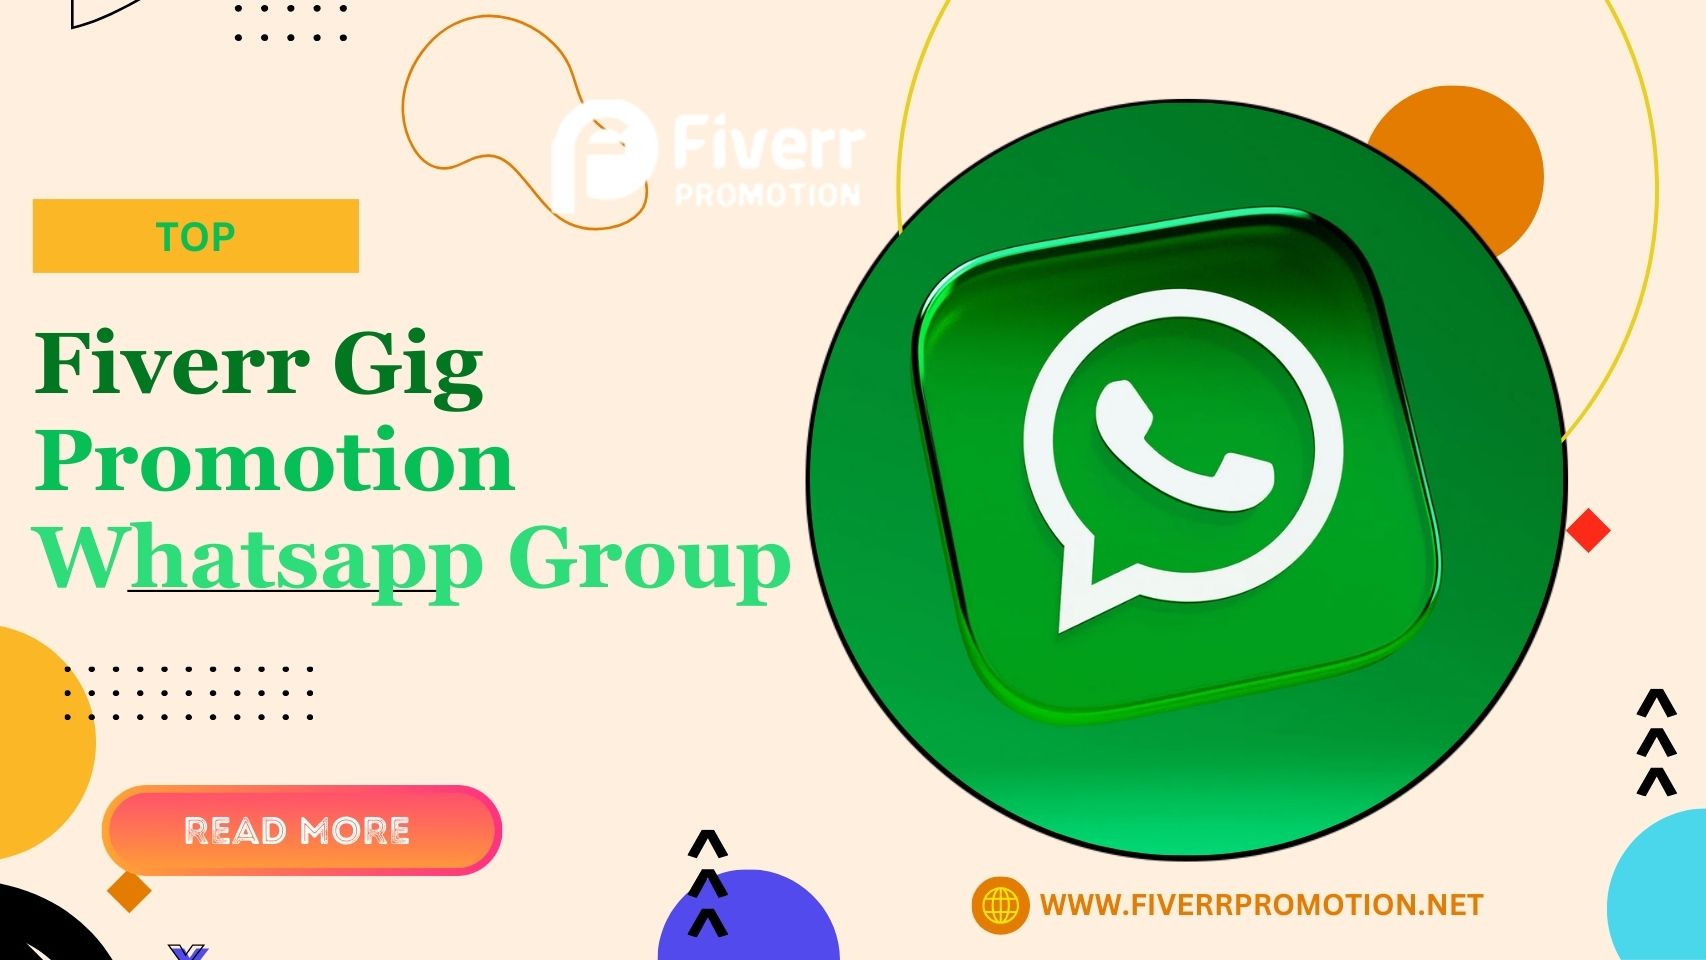 Top Fiverr Gig Promotion Whatsapp Group